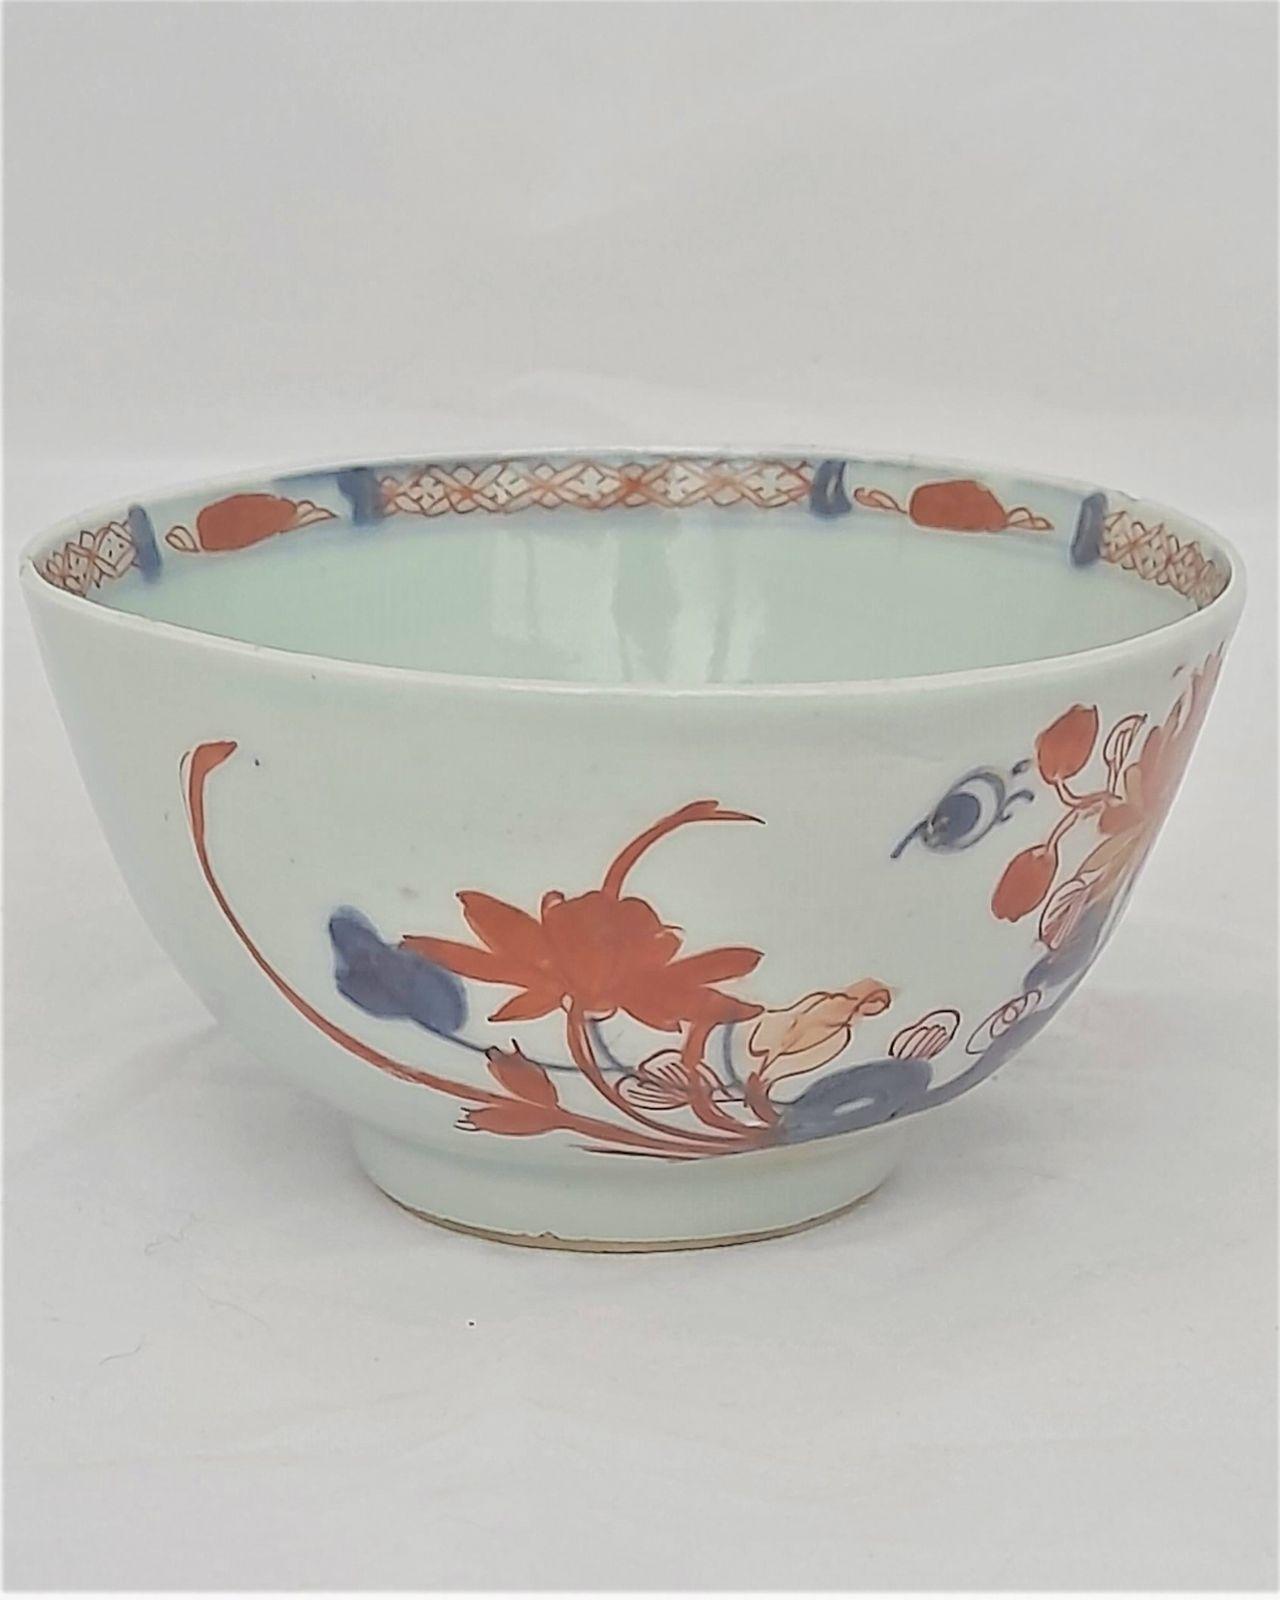 Chinese Porcelain Imari Pattern Bowl Rock and Peony Made During the reign of Emperor Qianlong 乾隆 Qing Dynasty 清代 Antique circa 1750 1 pint capacity rice bowl